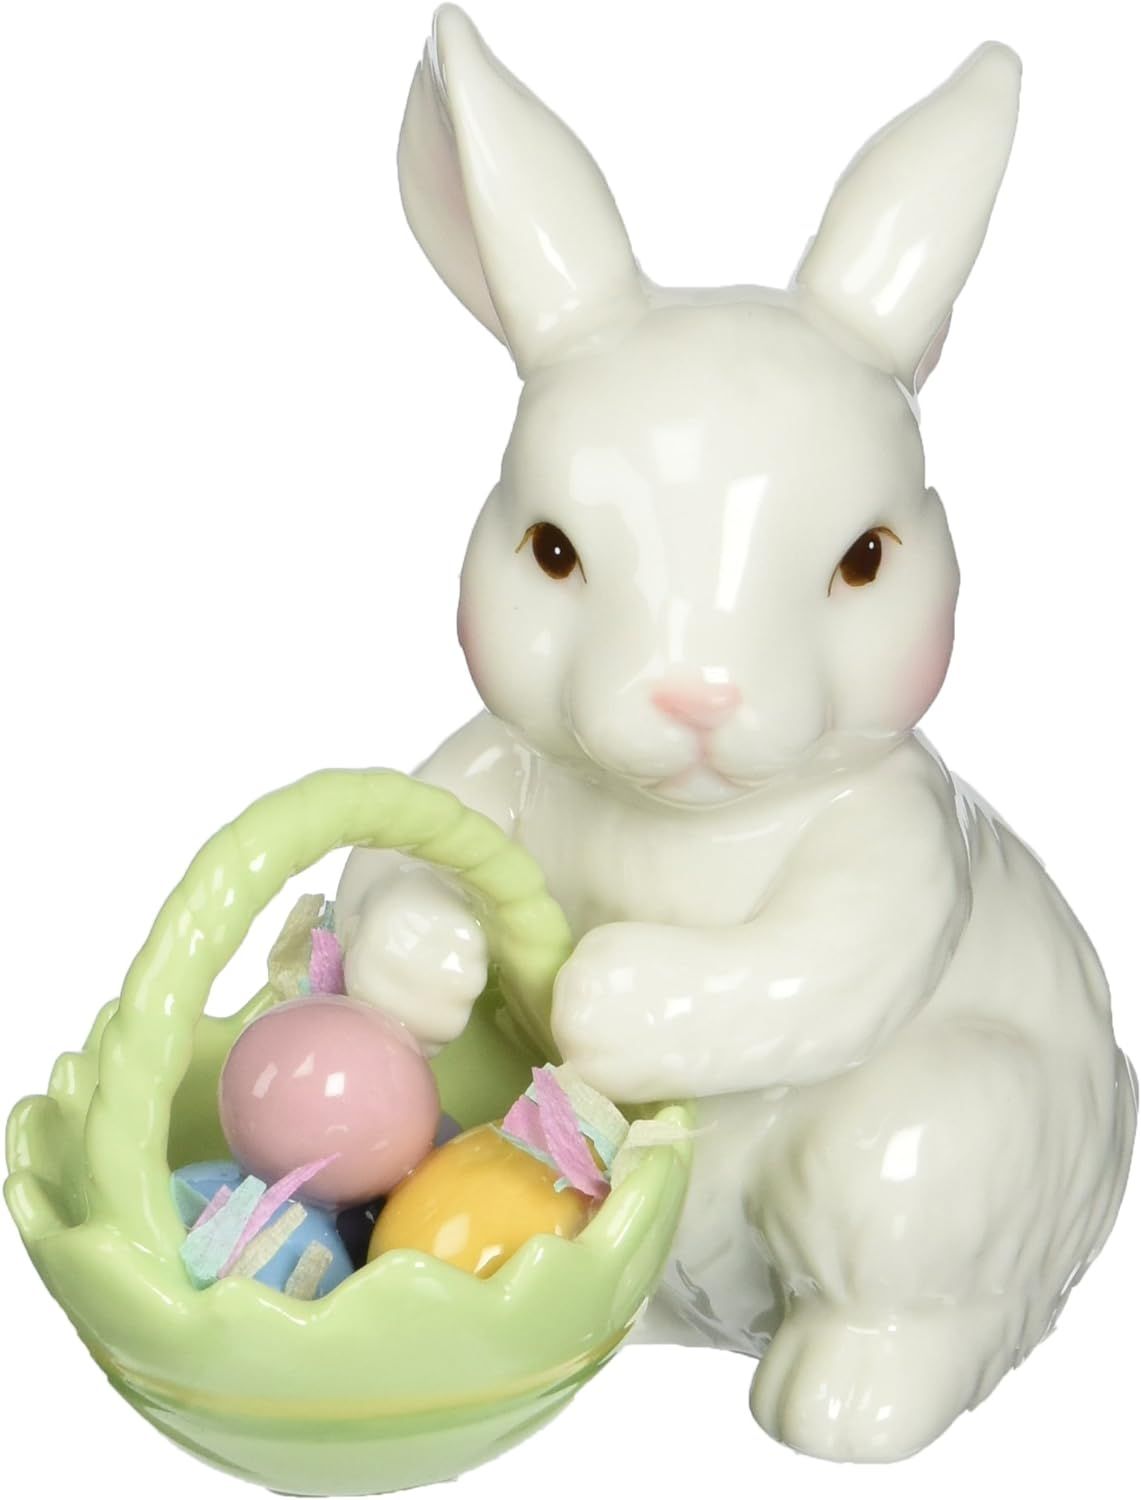 Cosmos 10593 Fine Porcelain Bunny with Easter Basket Figurine, 3-3/4-Inch,White | Amazon (US)